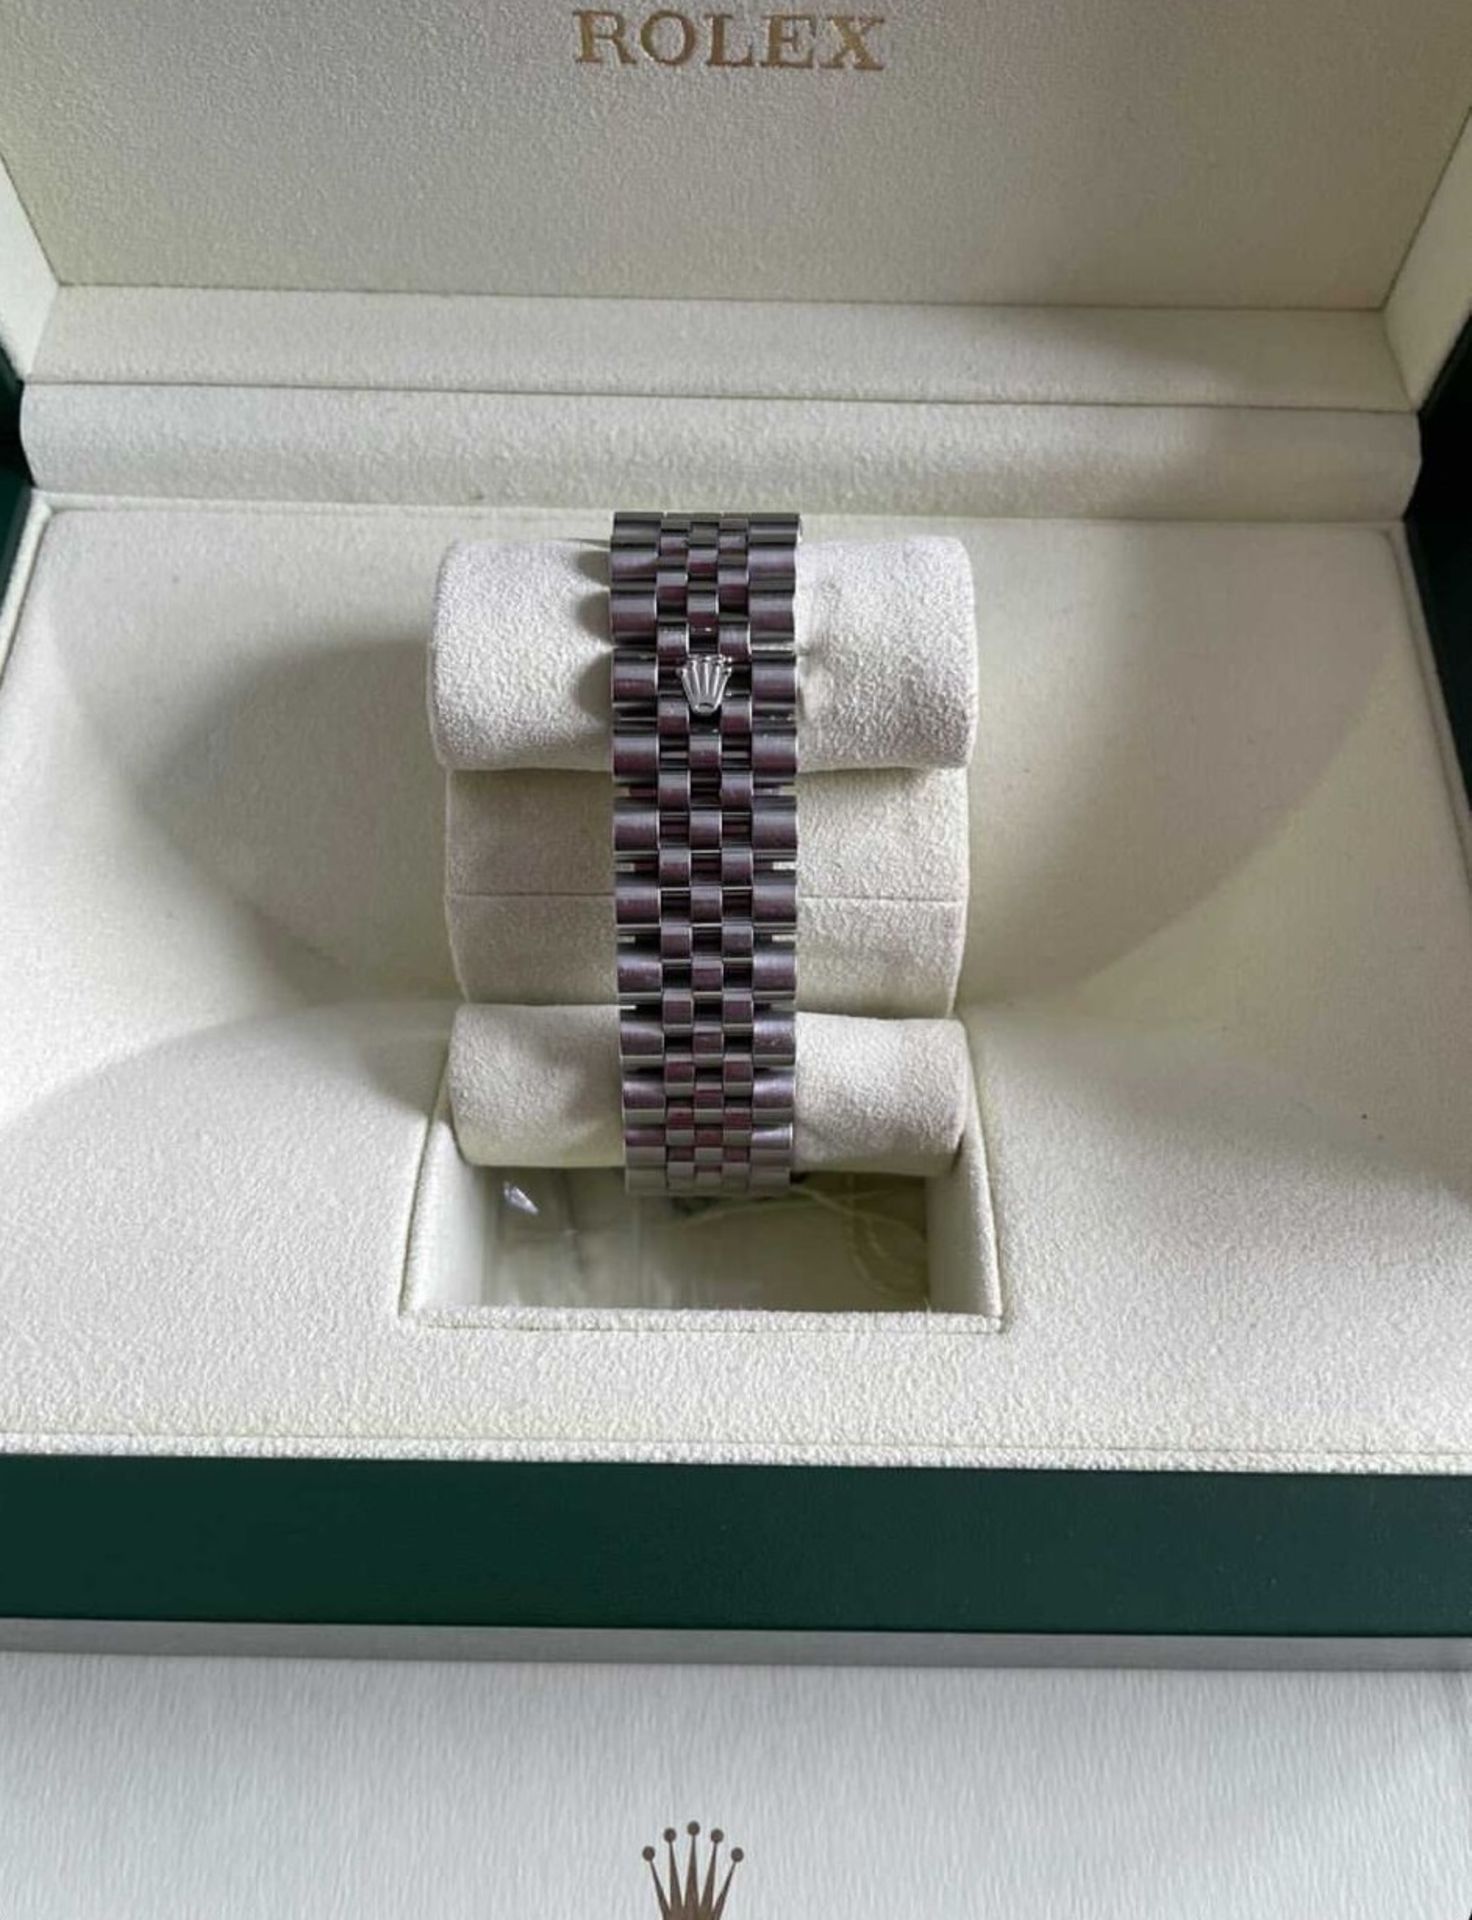 2008 ROLEX DATEJUST 116234 TUXEDO DIAL MENS WRIST WATCH - BOX AND CERTIFICATE OF AUTHENTICITY - Image 3 of 3